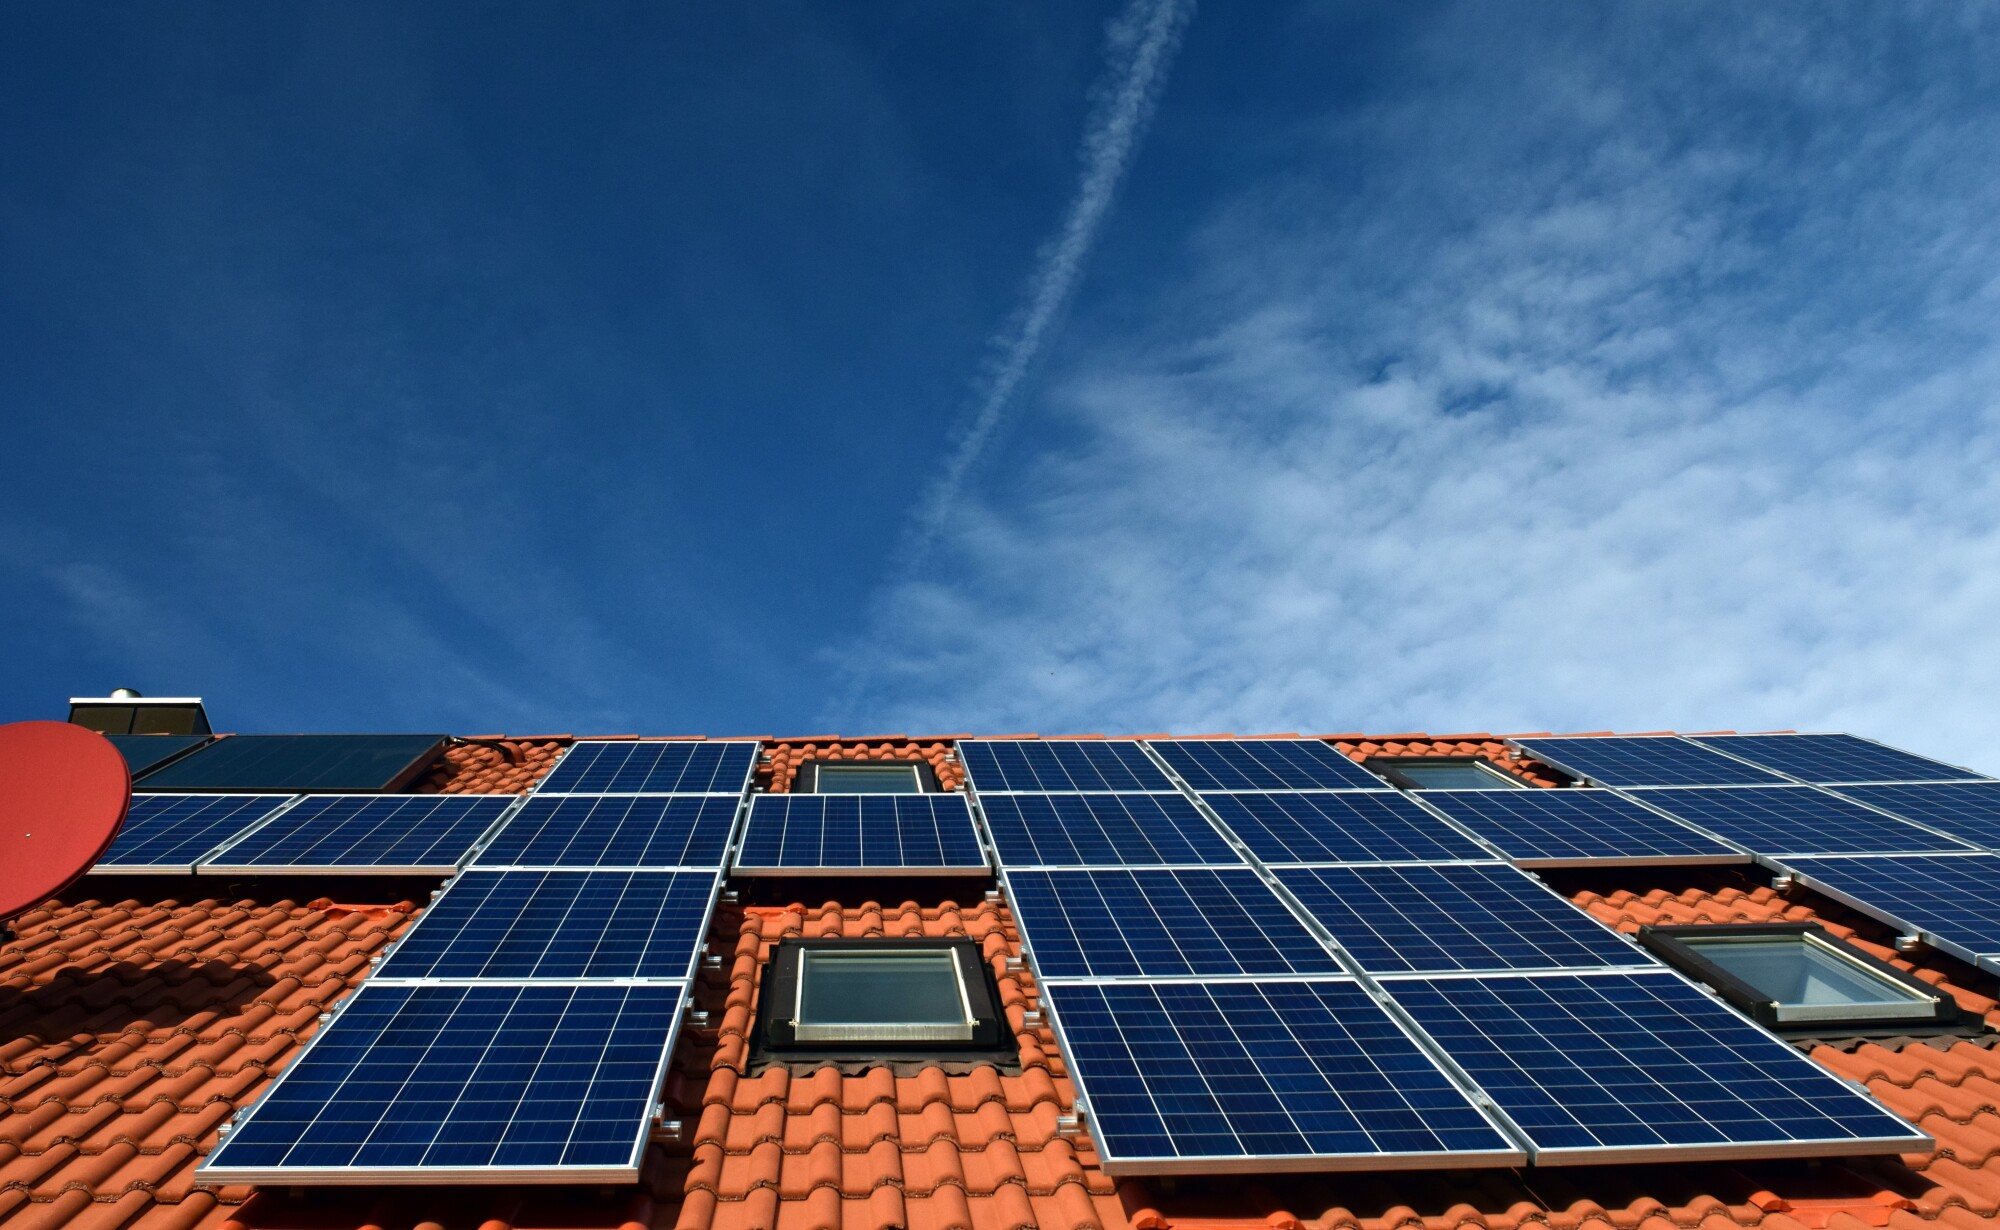 How to Buy Solar Panel Systems